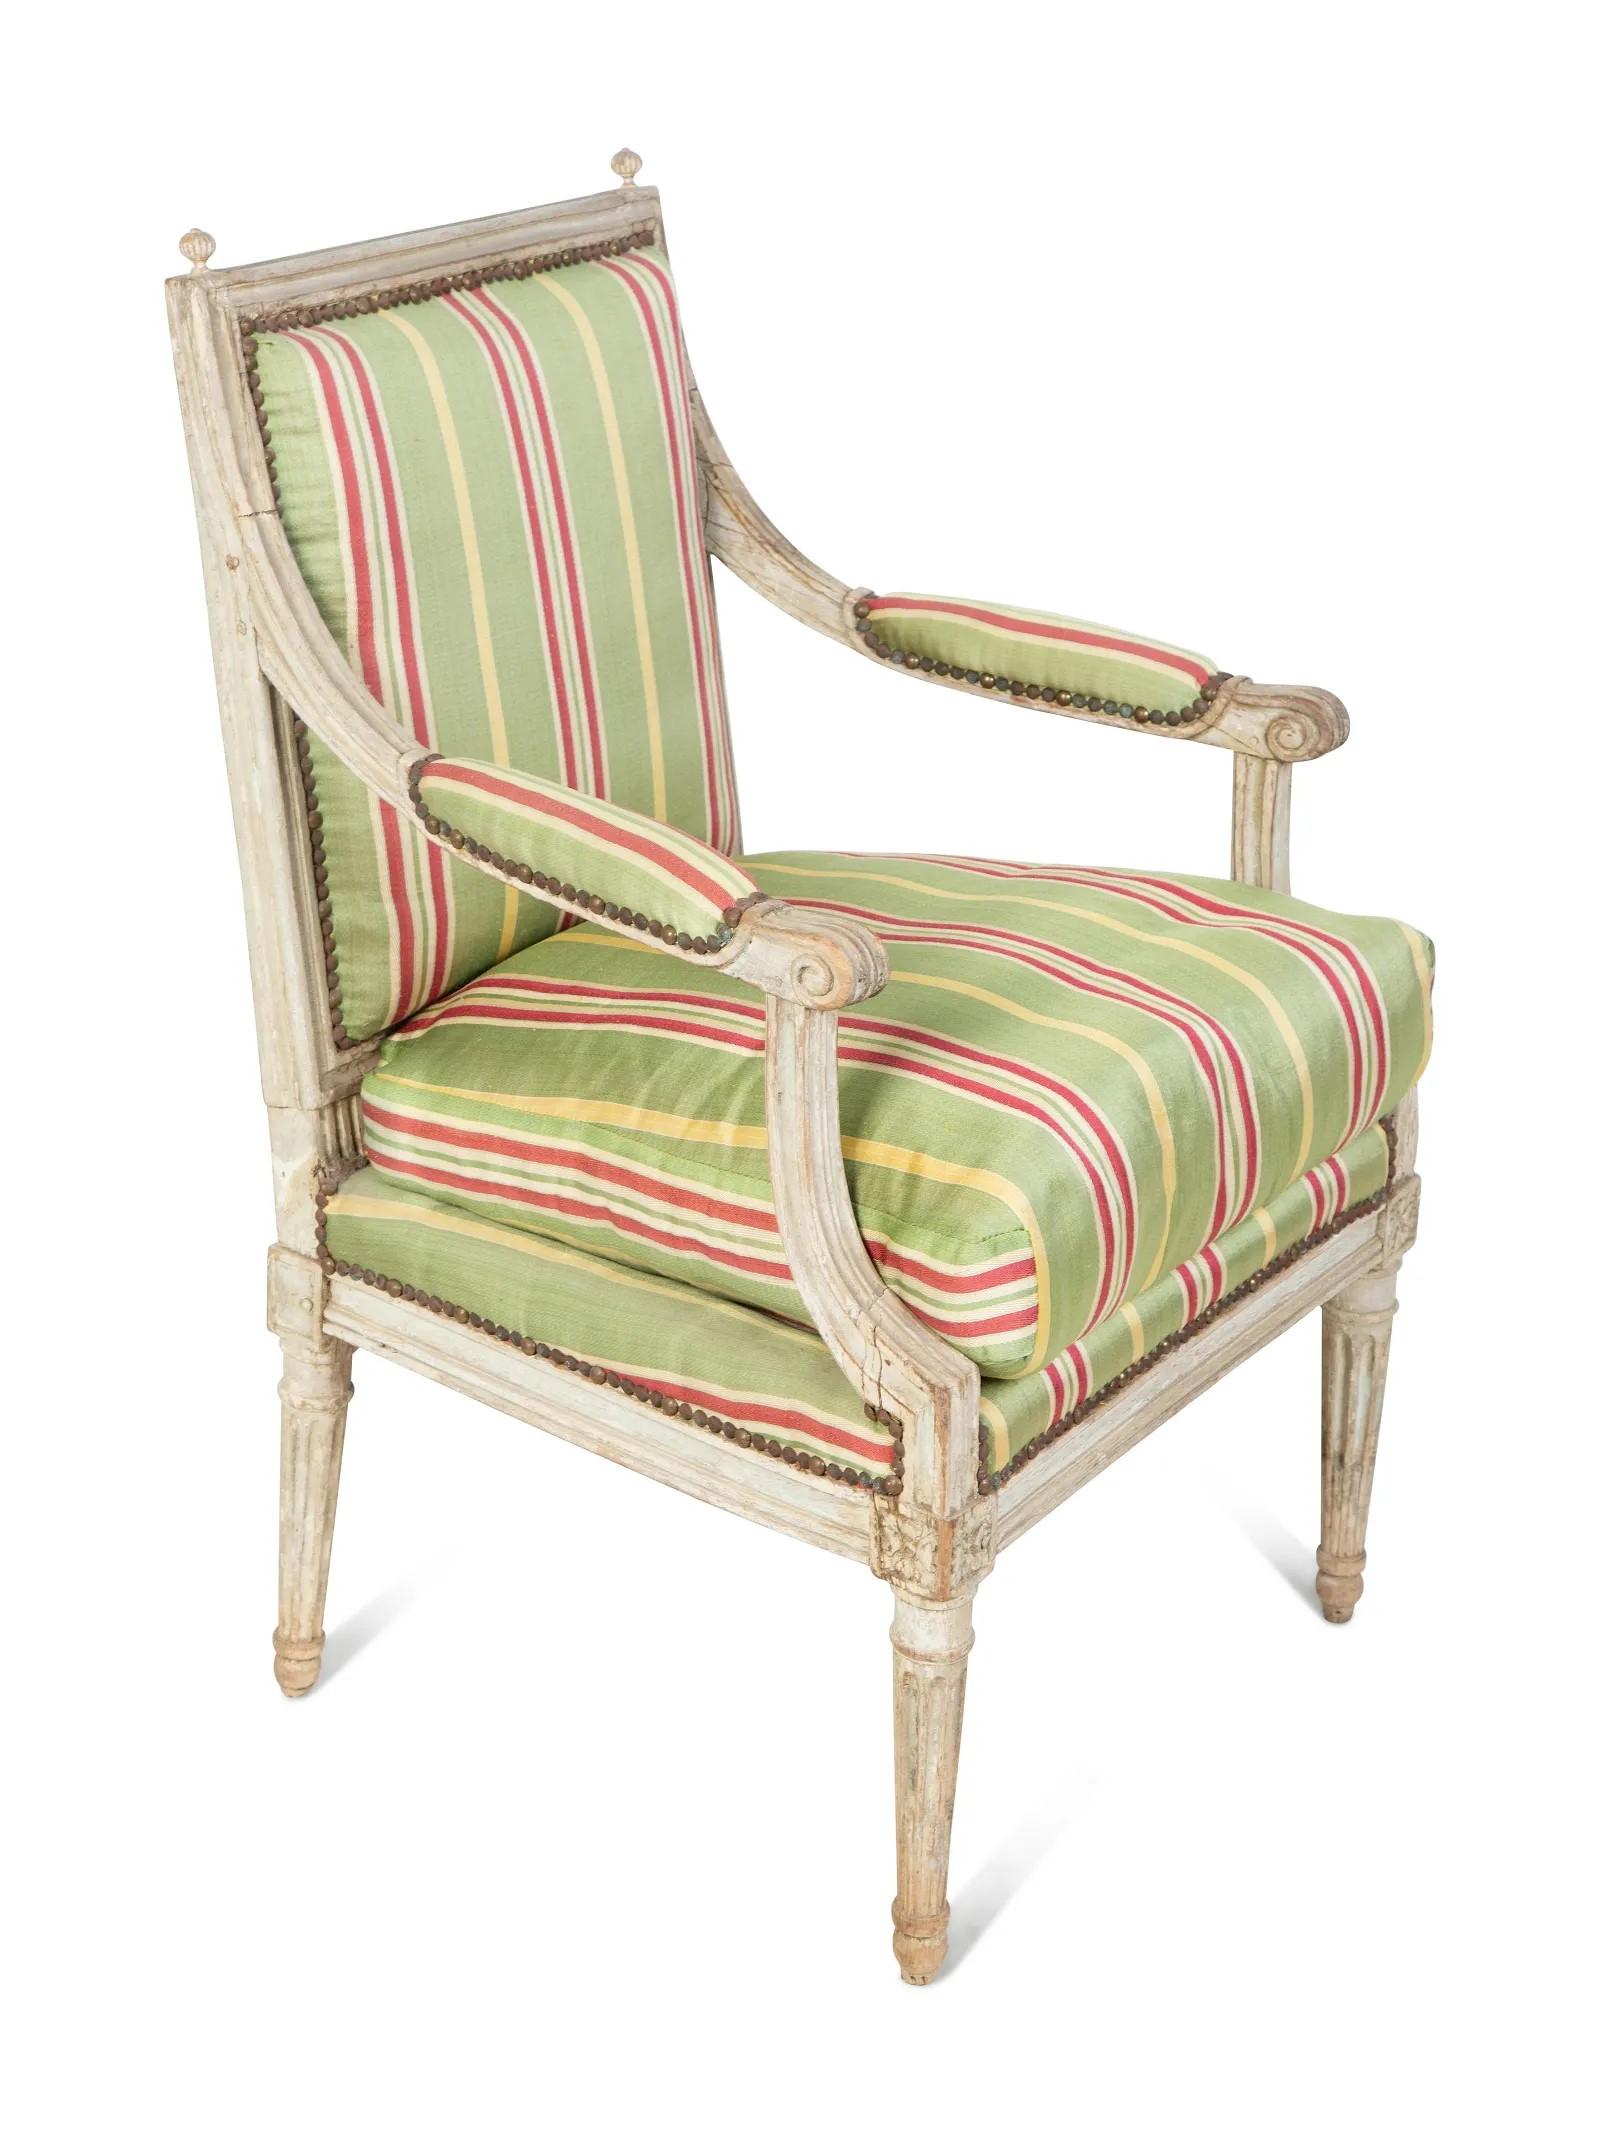 Hand-Carved 18th Century Louis XVI Fauteuil in Original Painted Finish For Sale